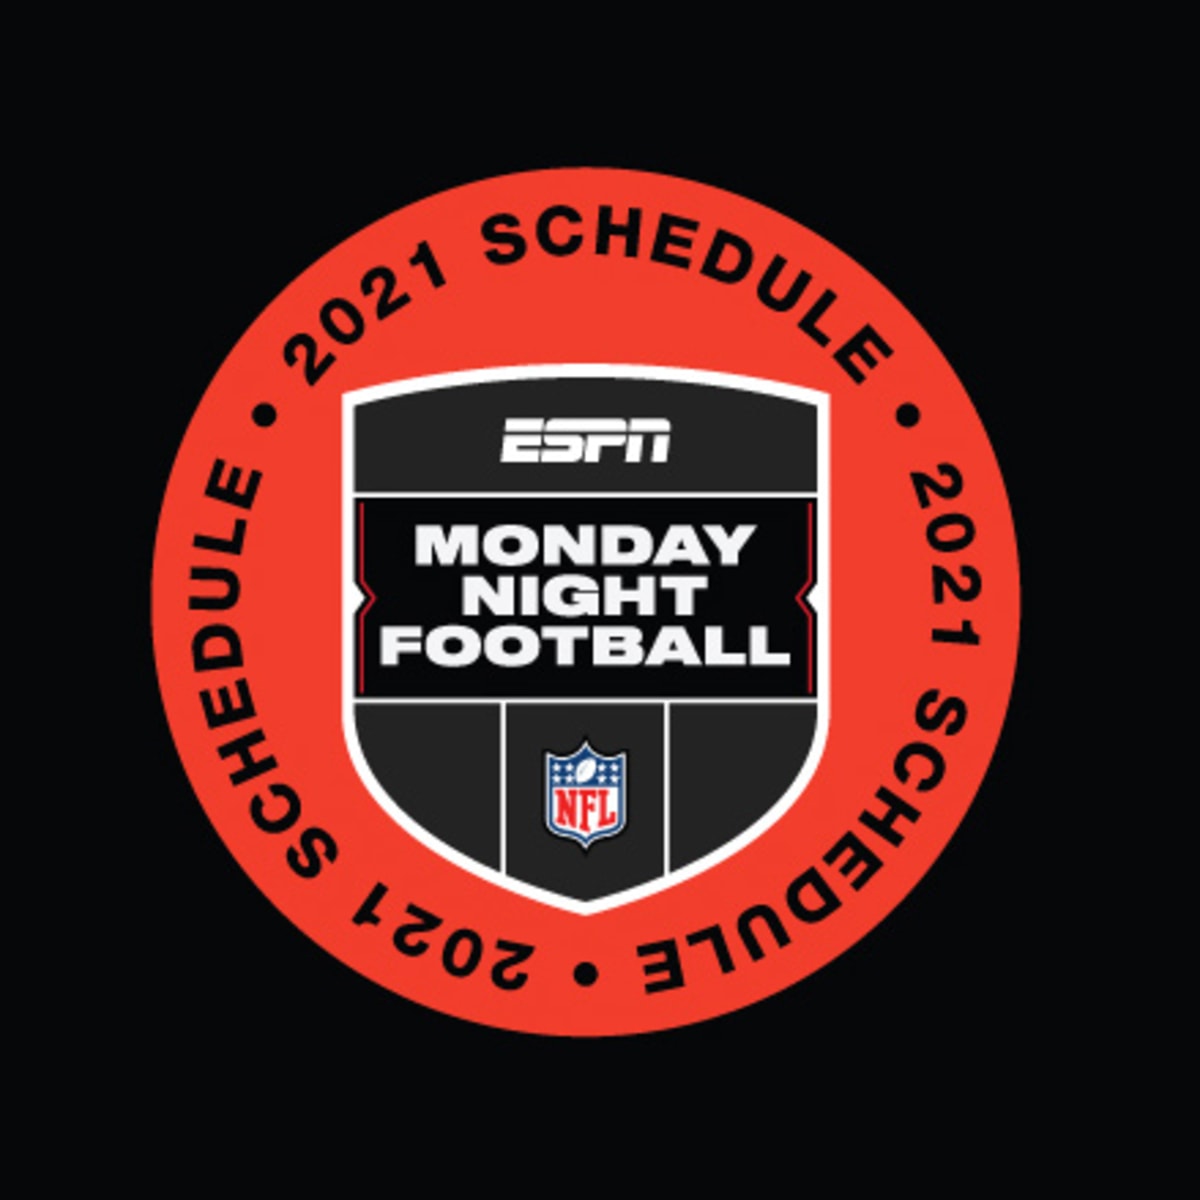 Monday Night Football Schedule 2022 Nfl Monday Night Football Schedule 2021 - Athlonsports.com | Expert  Predictions, Picks, And Previews